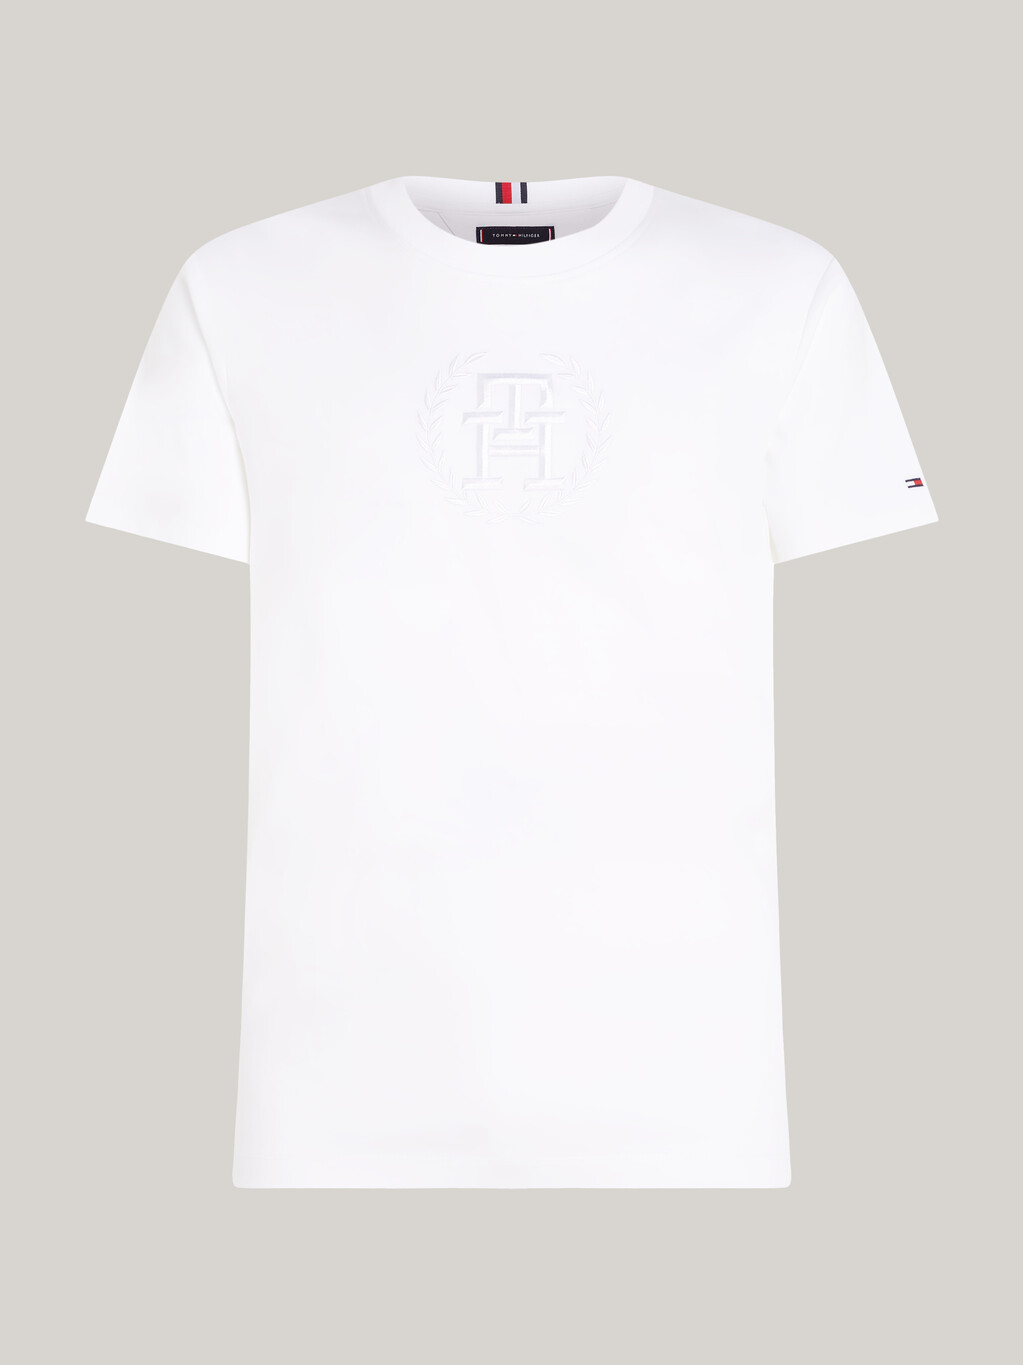 Archive Crest Logo Tonal Embroidery T-Shirt, White, hi-res